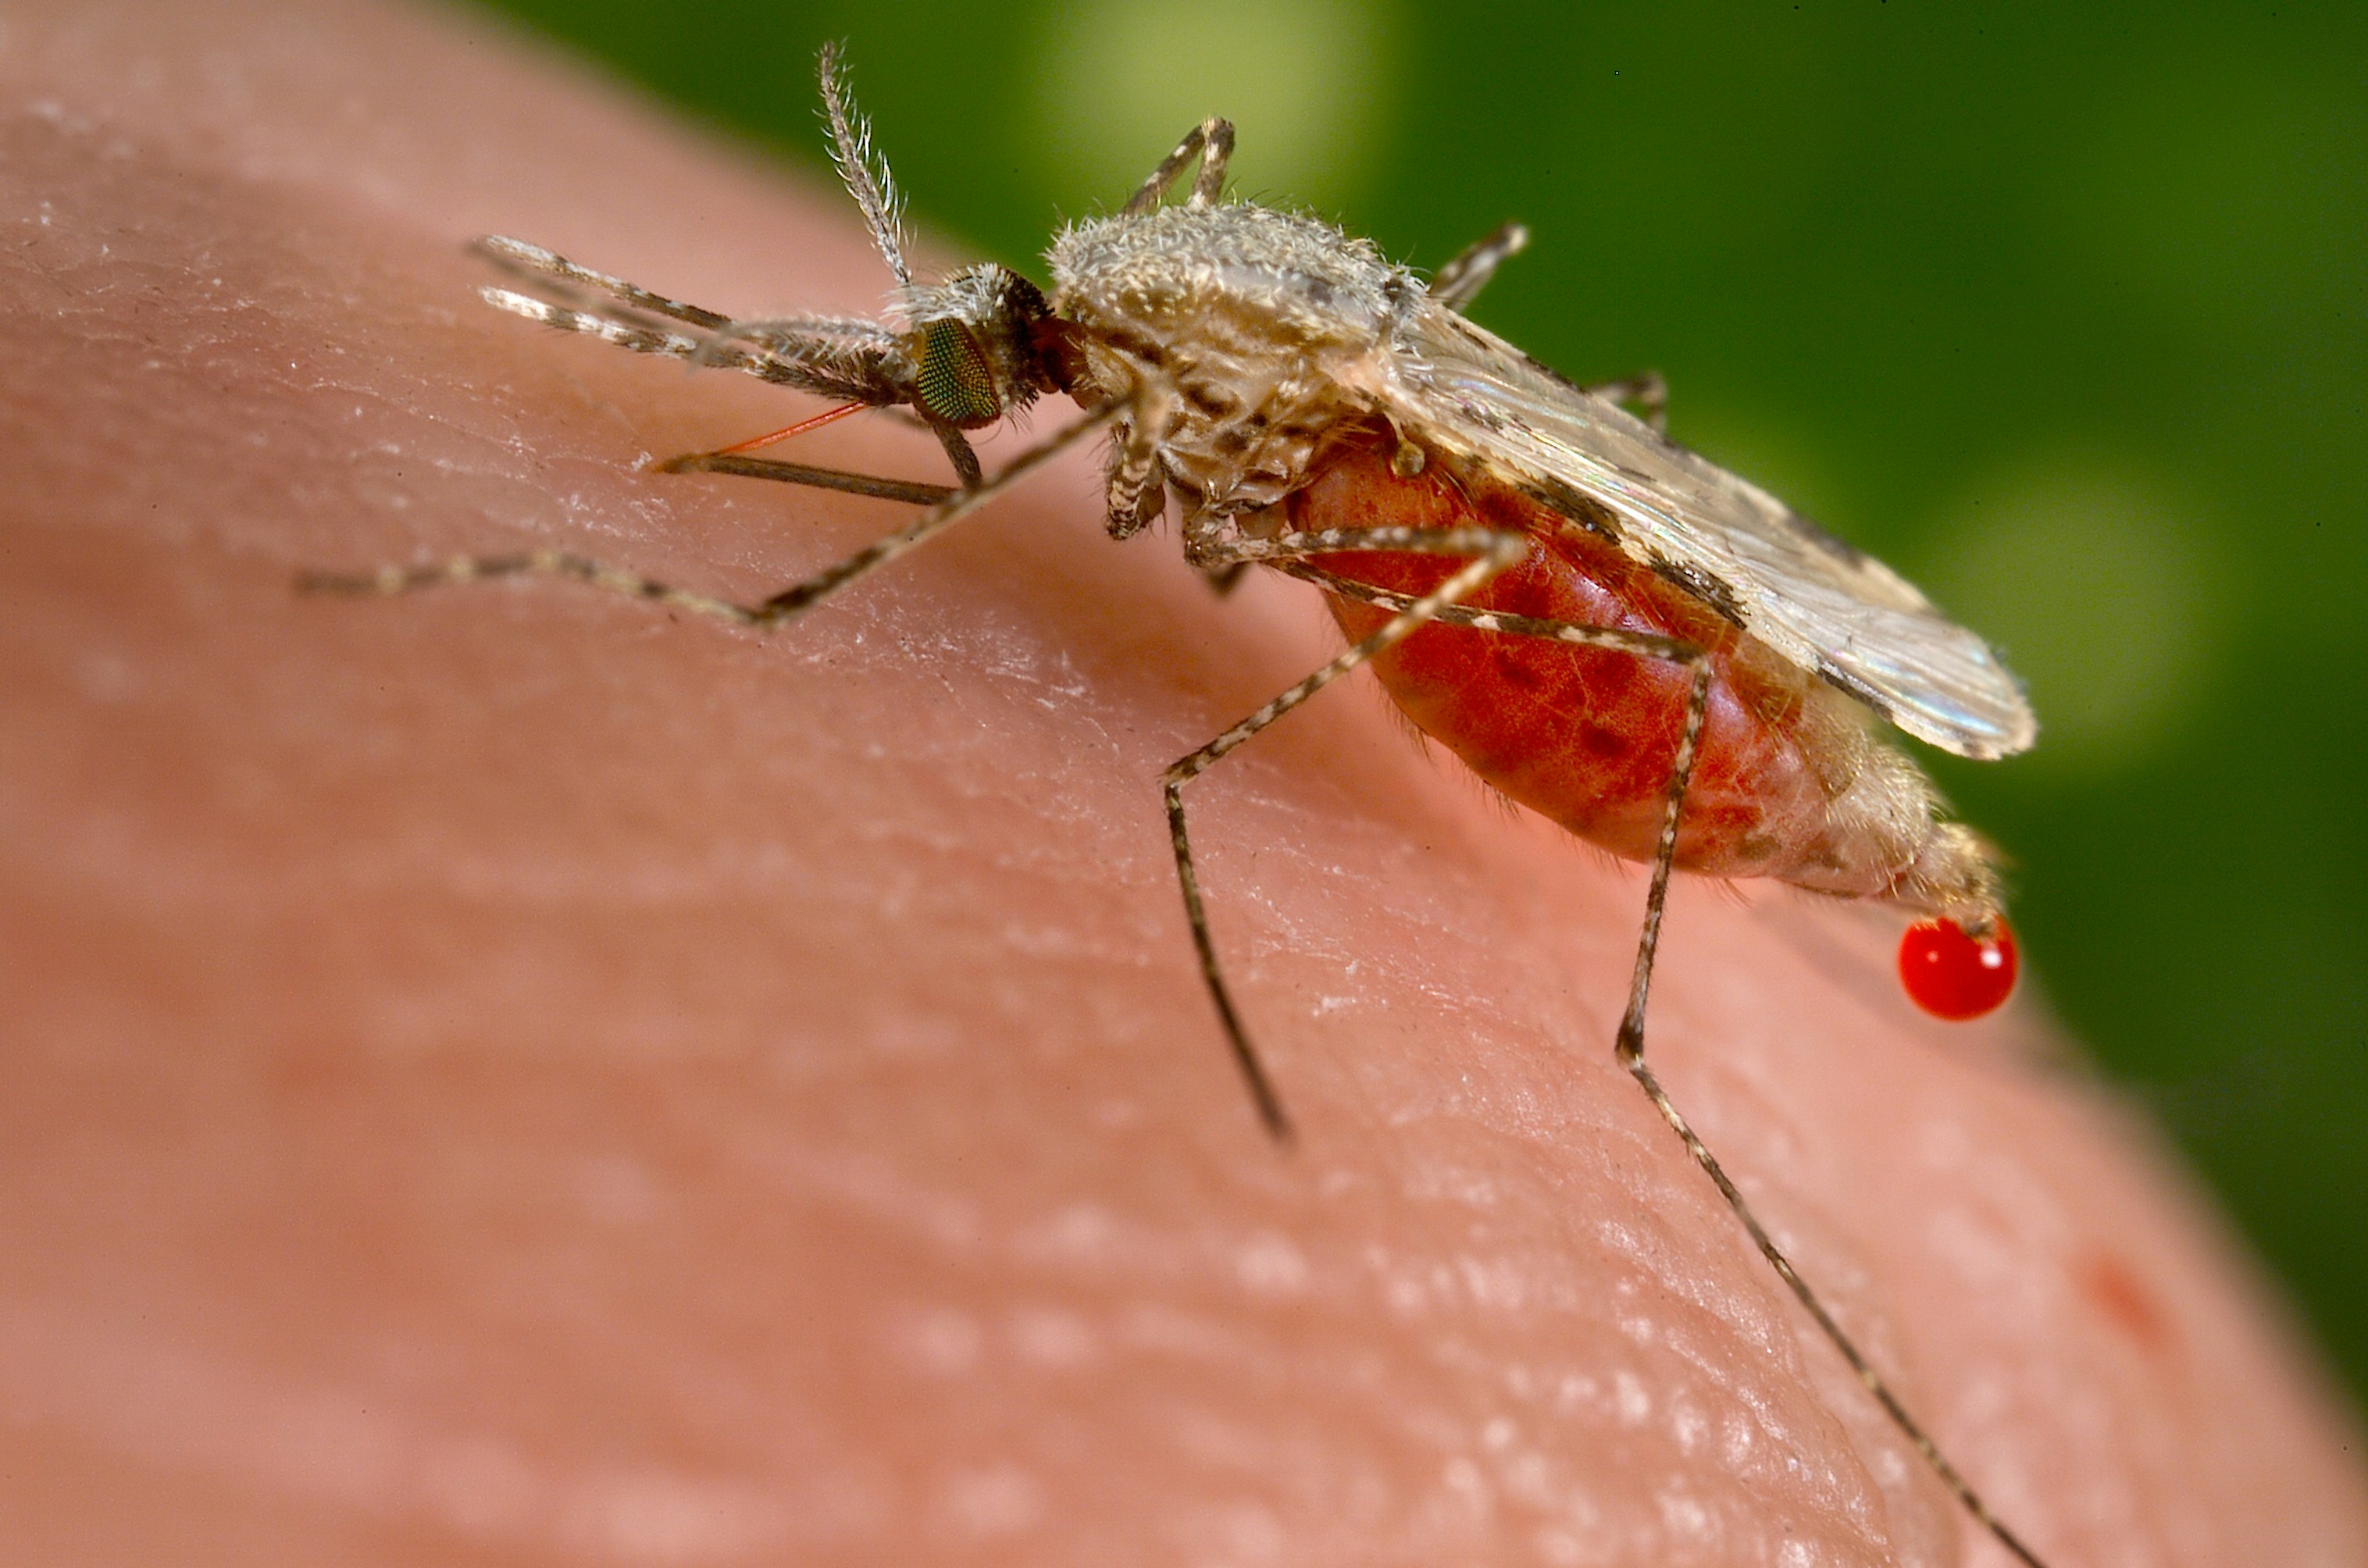 An Anopheles stephensi mosquito is obtaining a blood meal from a human host through its pointed proboscis. Note the droplet of blood being expelled from the abdomen after having engorged itself on its host’s blood. This mosquito is a known malarial vector with a distribution that ranges from Egypt all the way to China.